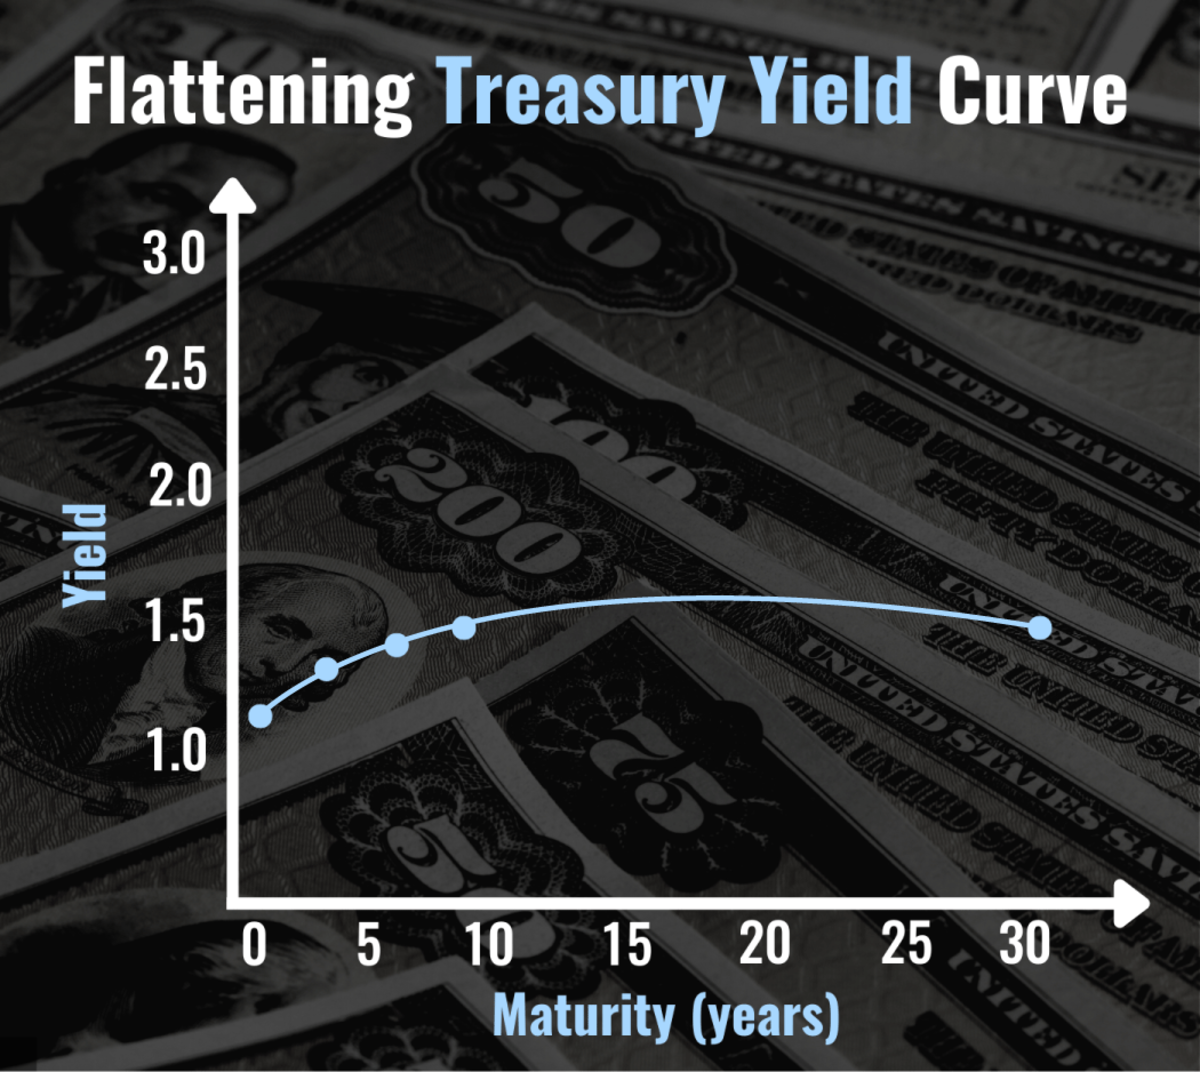 Here, Treasury yields "flatten," or become similar.